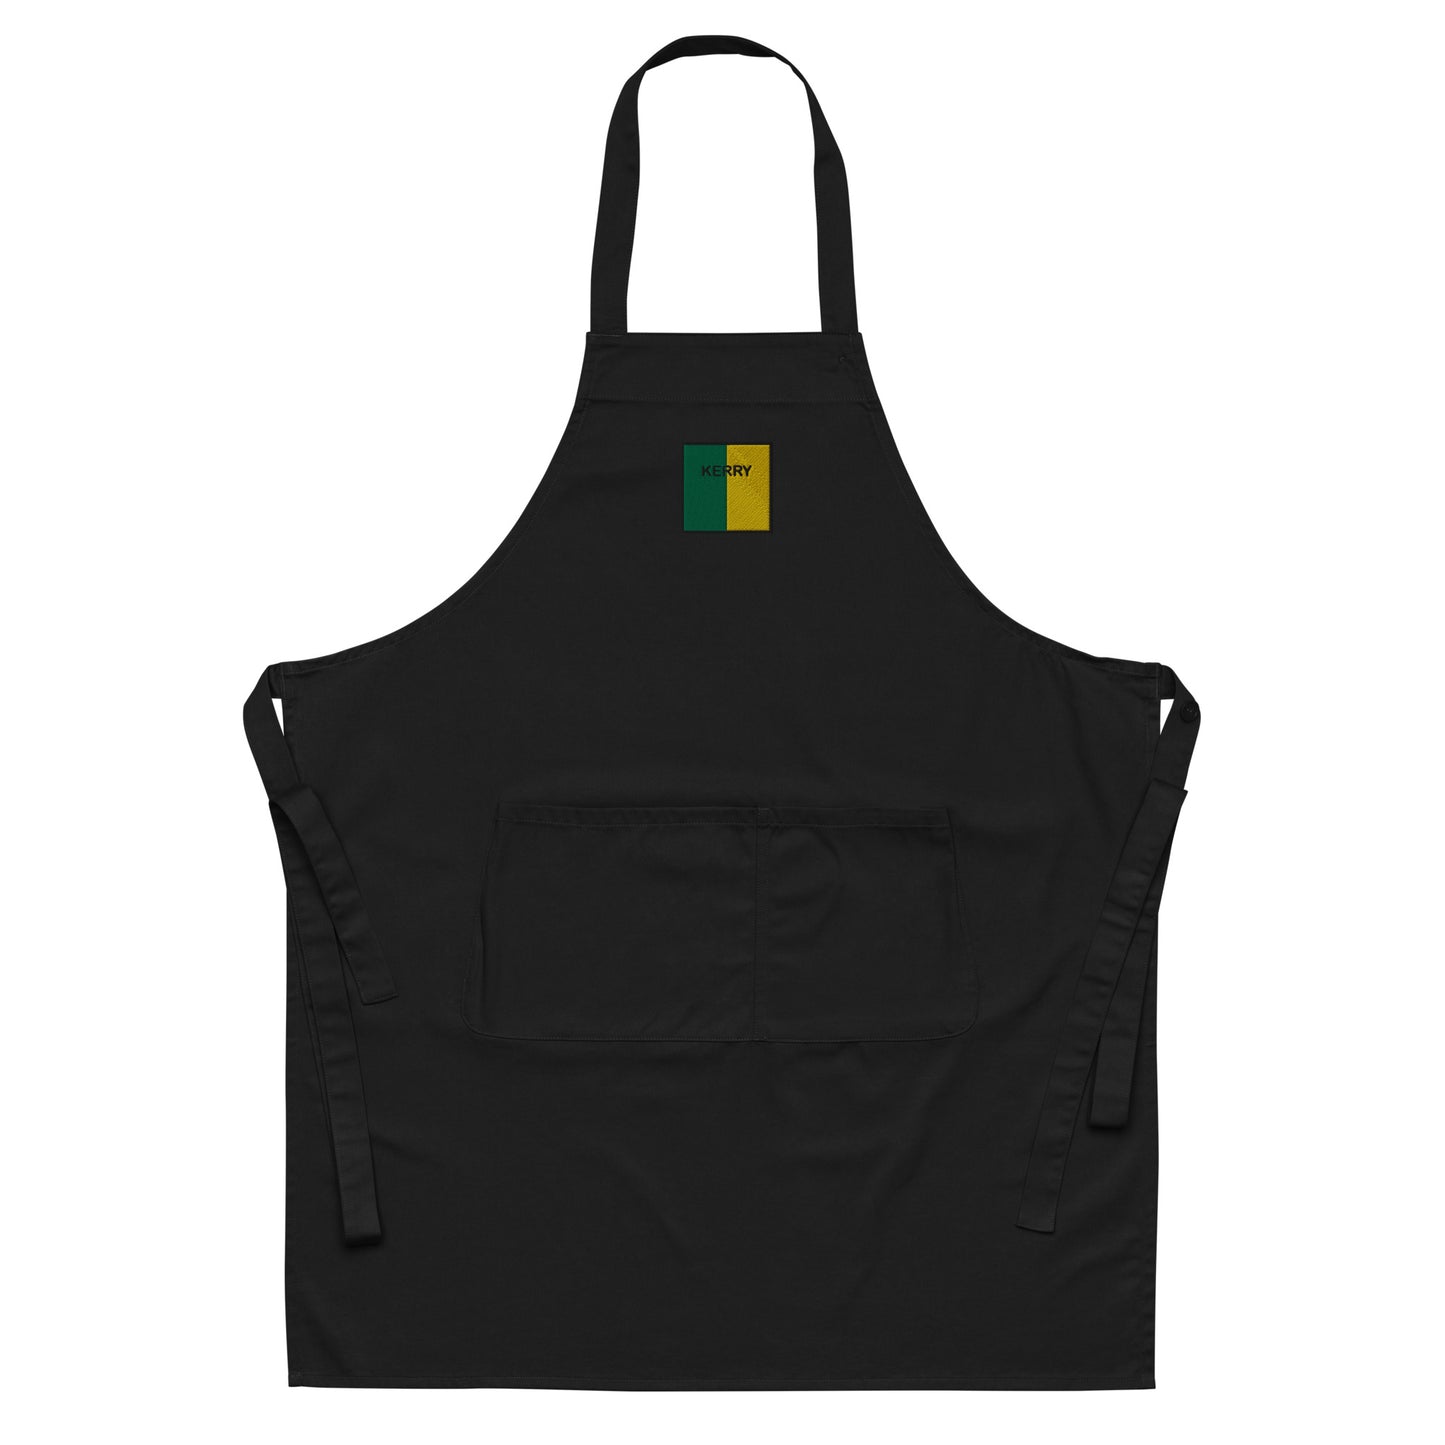 Embroidered Kerry Apron - 100% organic cotton